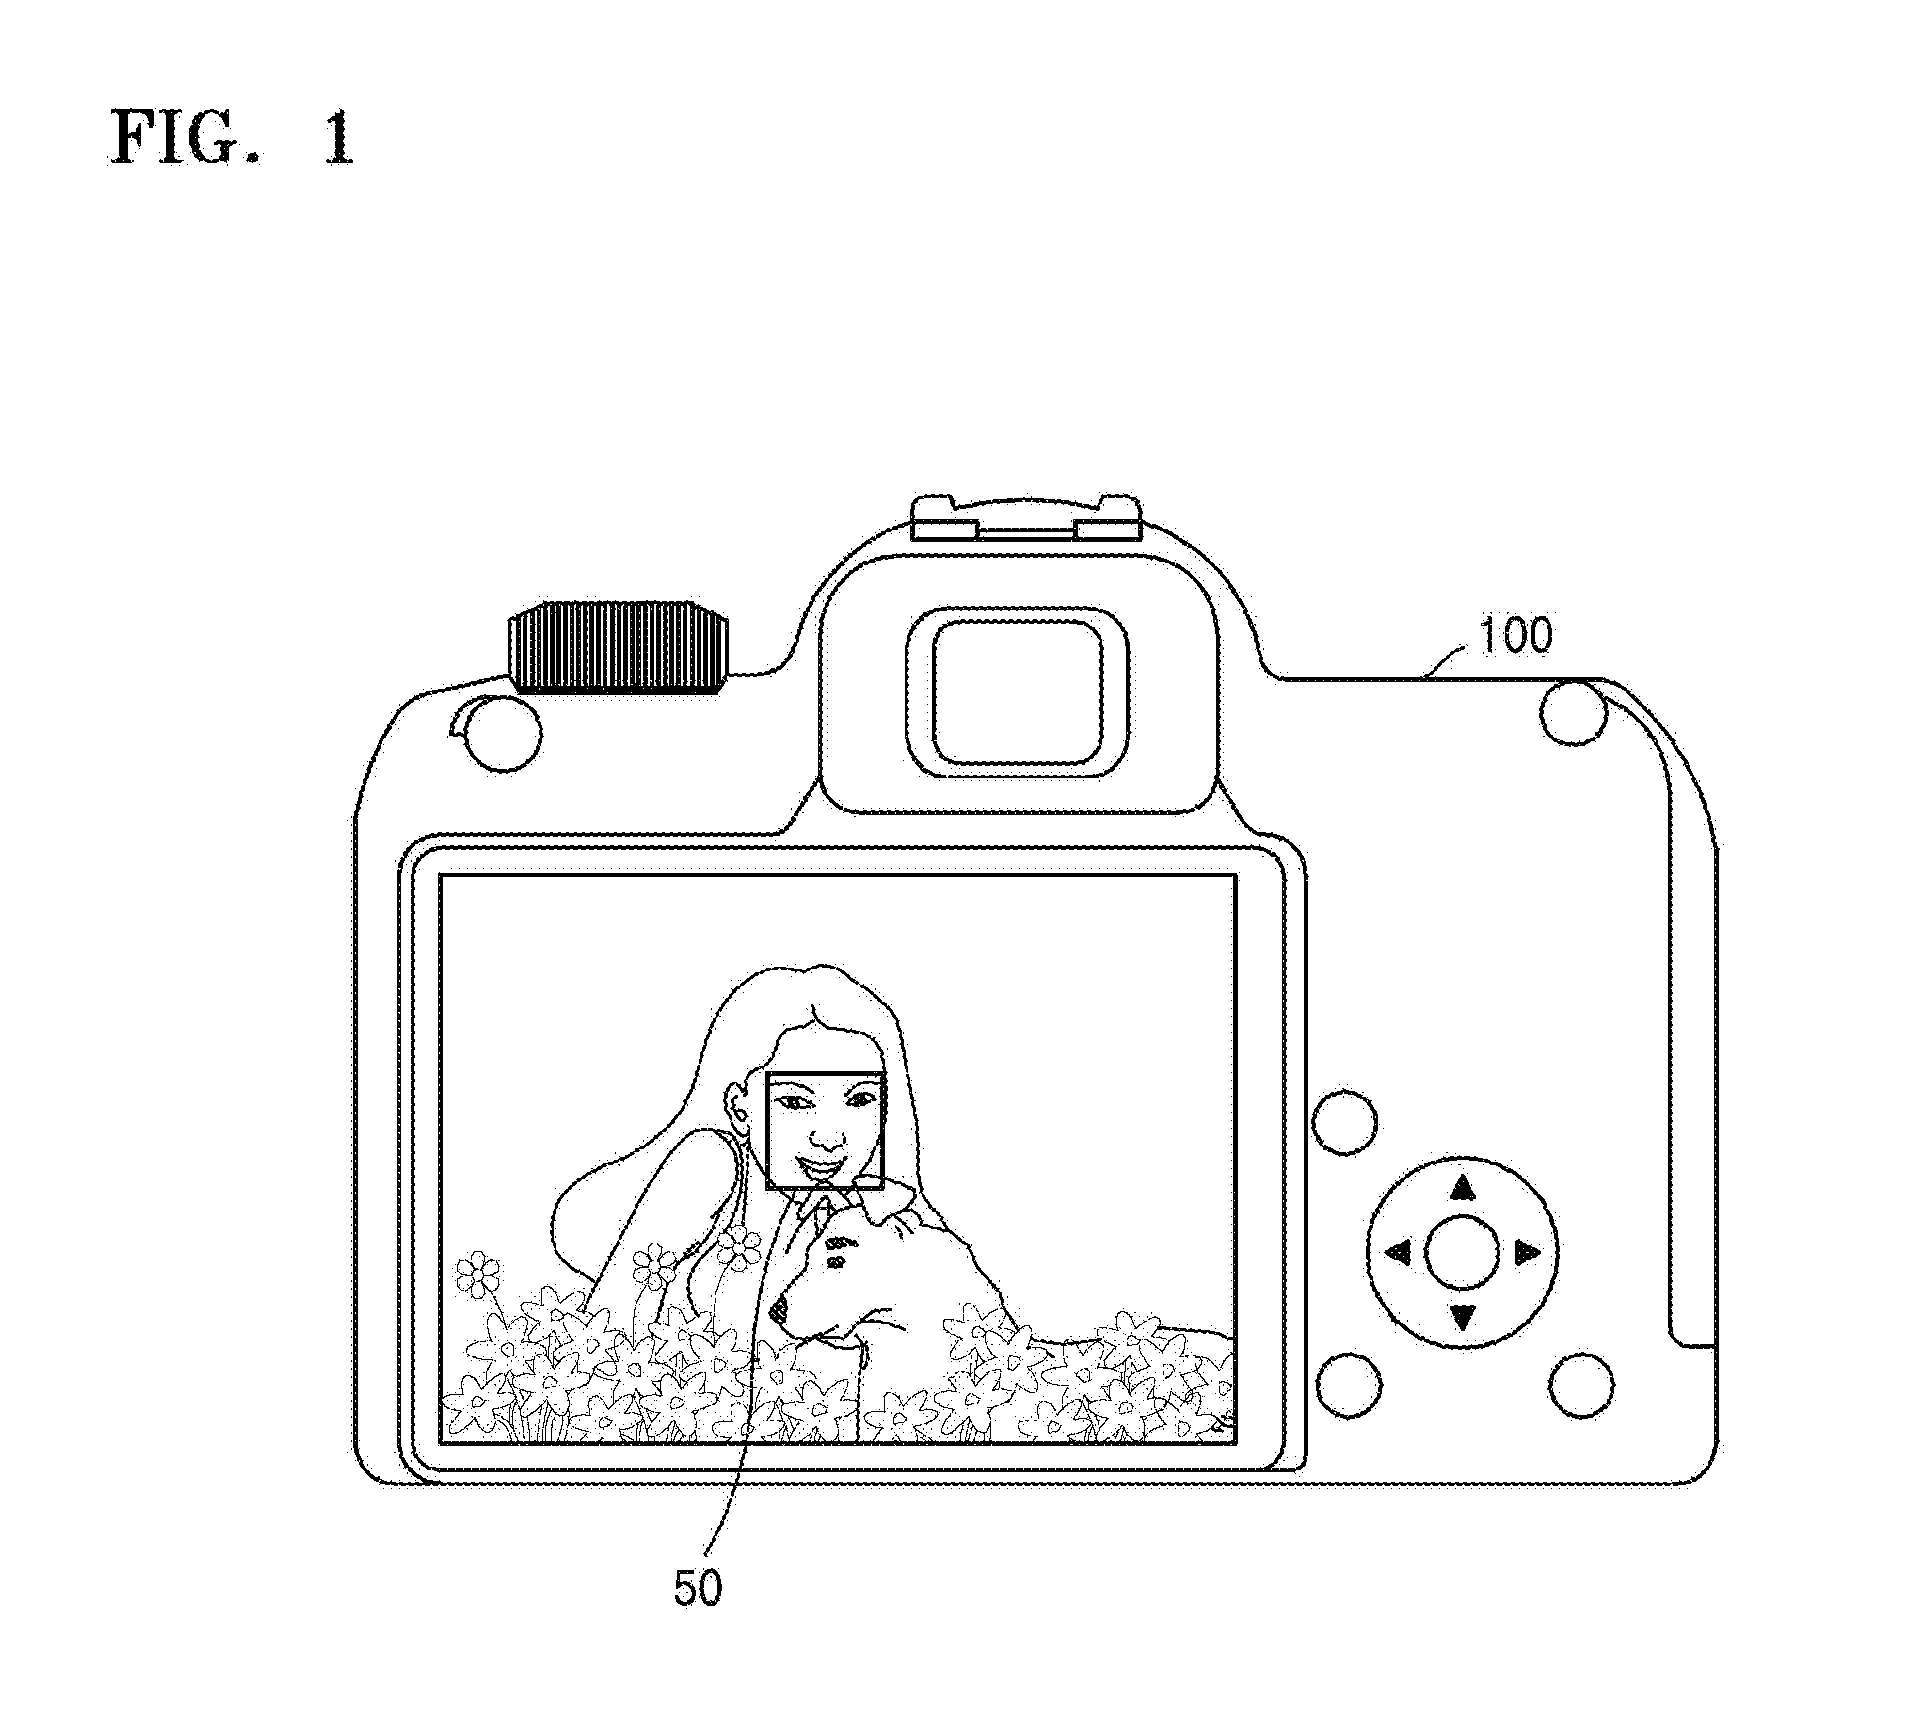 Image capturing apparatus and method of operating the same